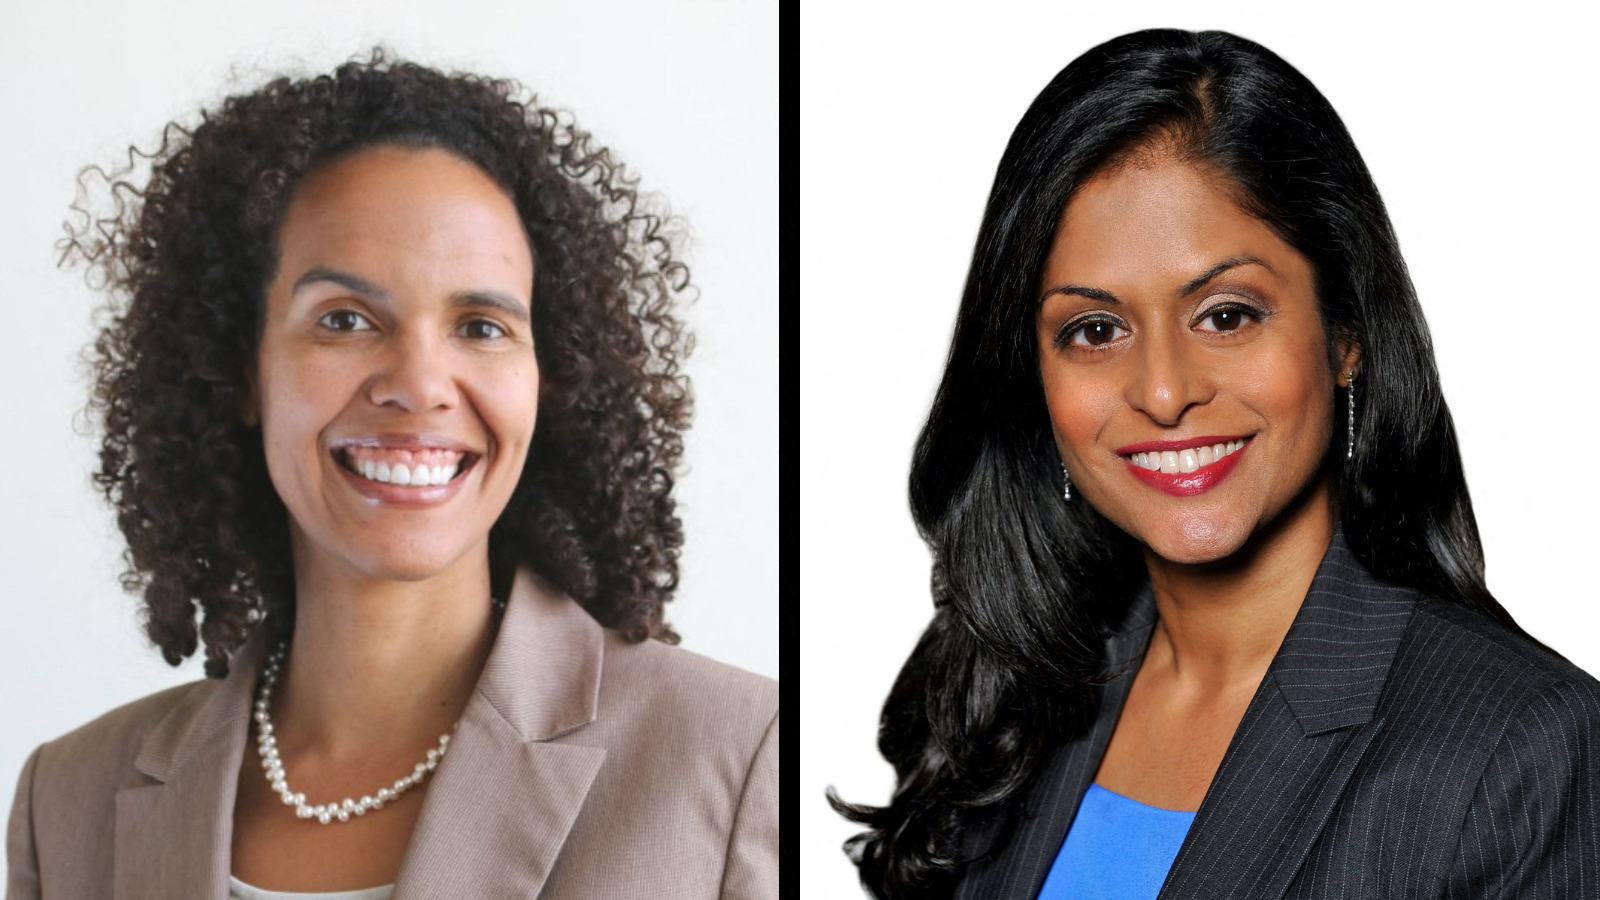 Arianna Freeman (L) and Nusrat Choudhury (R). Photos courtesy of Federal Defenders office and ACLU